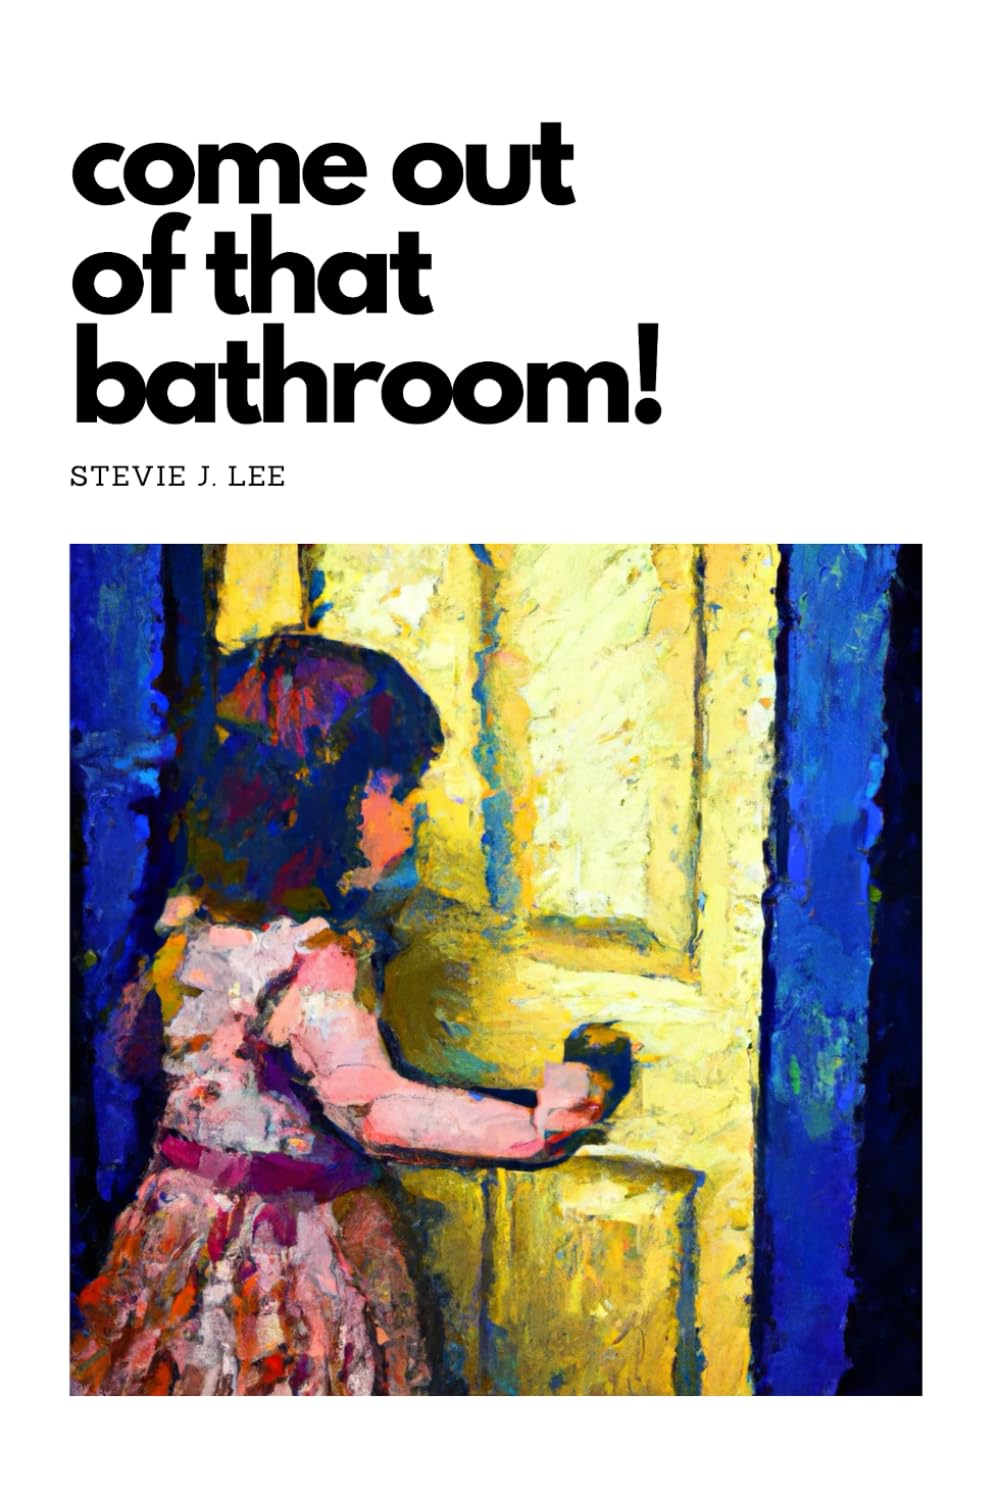 COME OUT OF THAT BATHROOM: A fun picture book reproduction of a letter written and slipped under the bathroom door by a six-year-old girl.